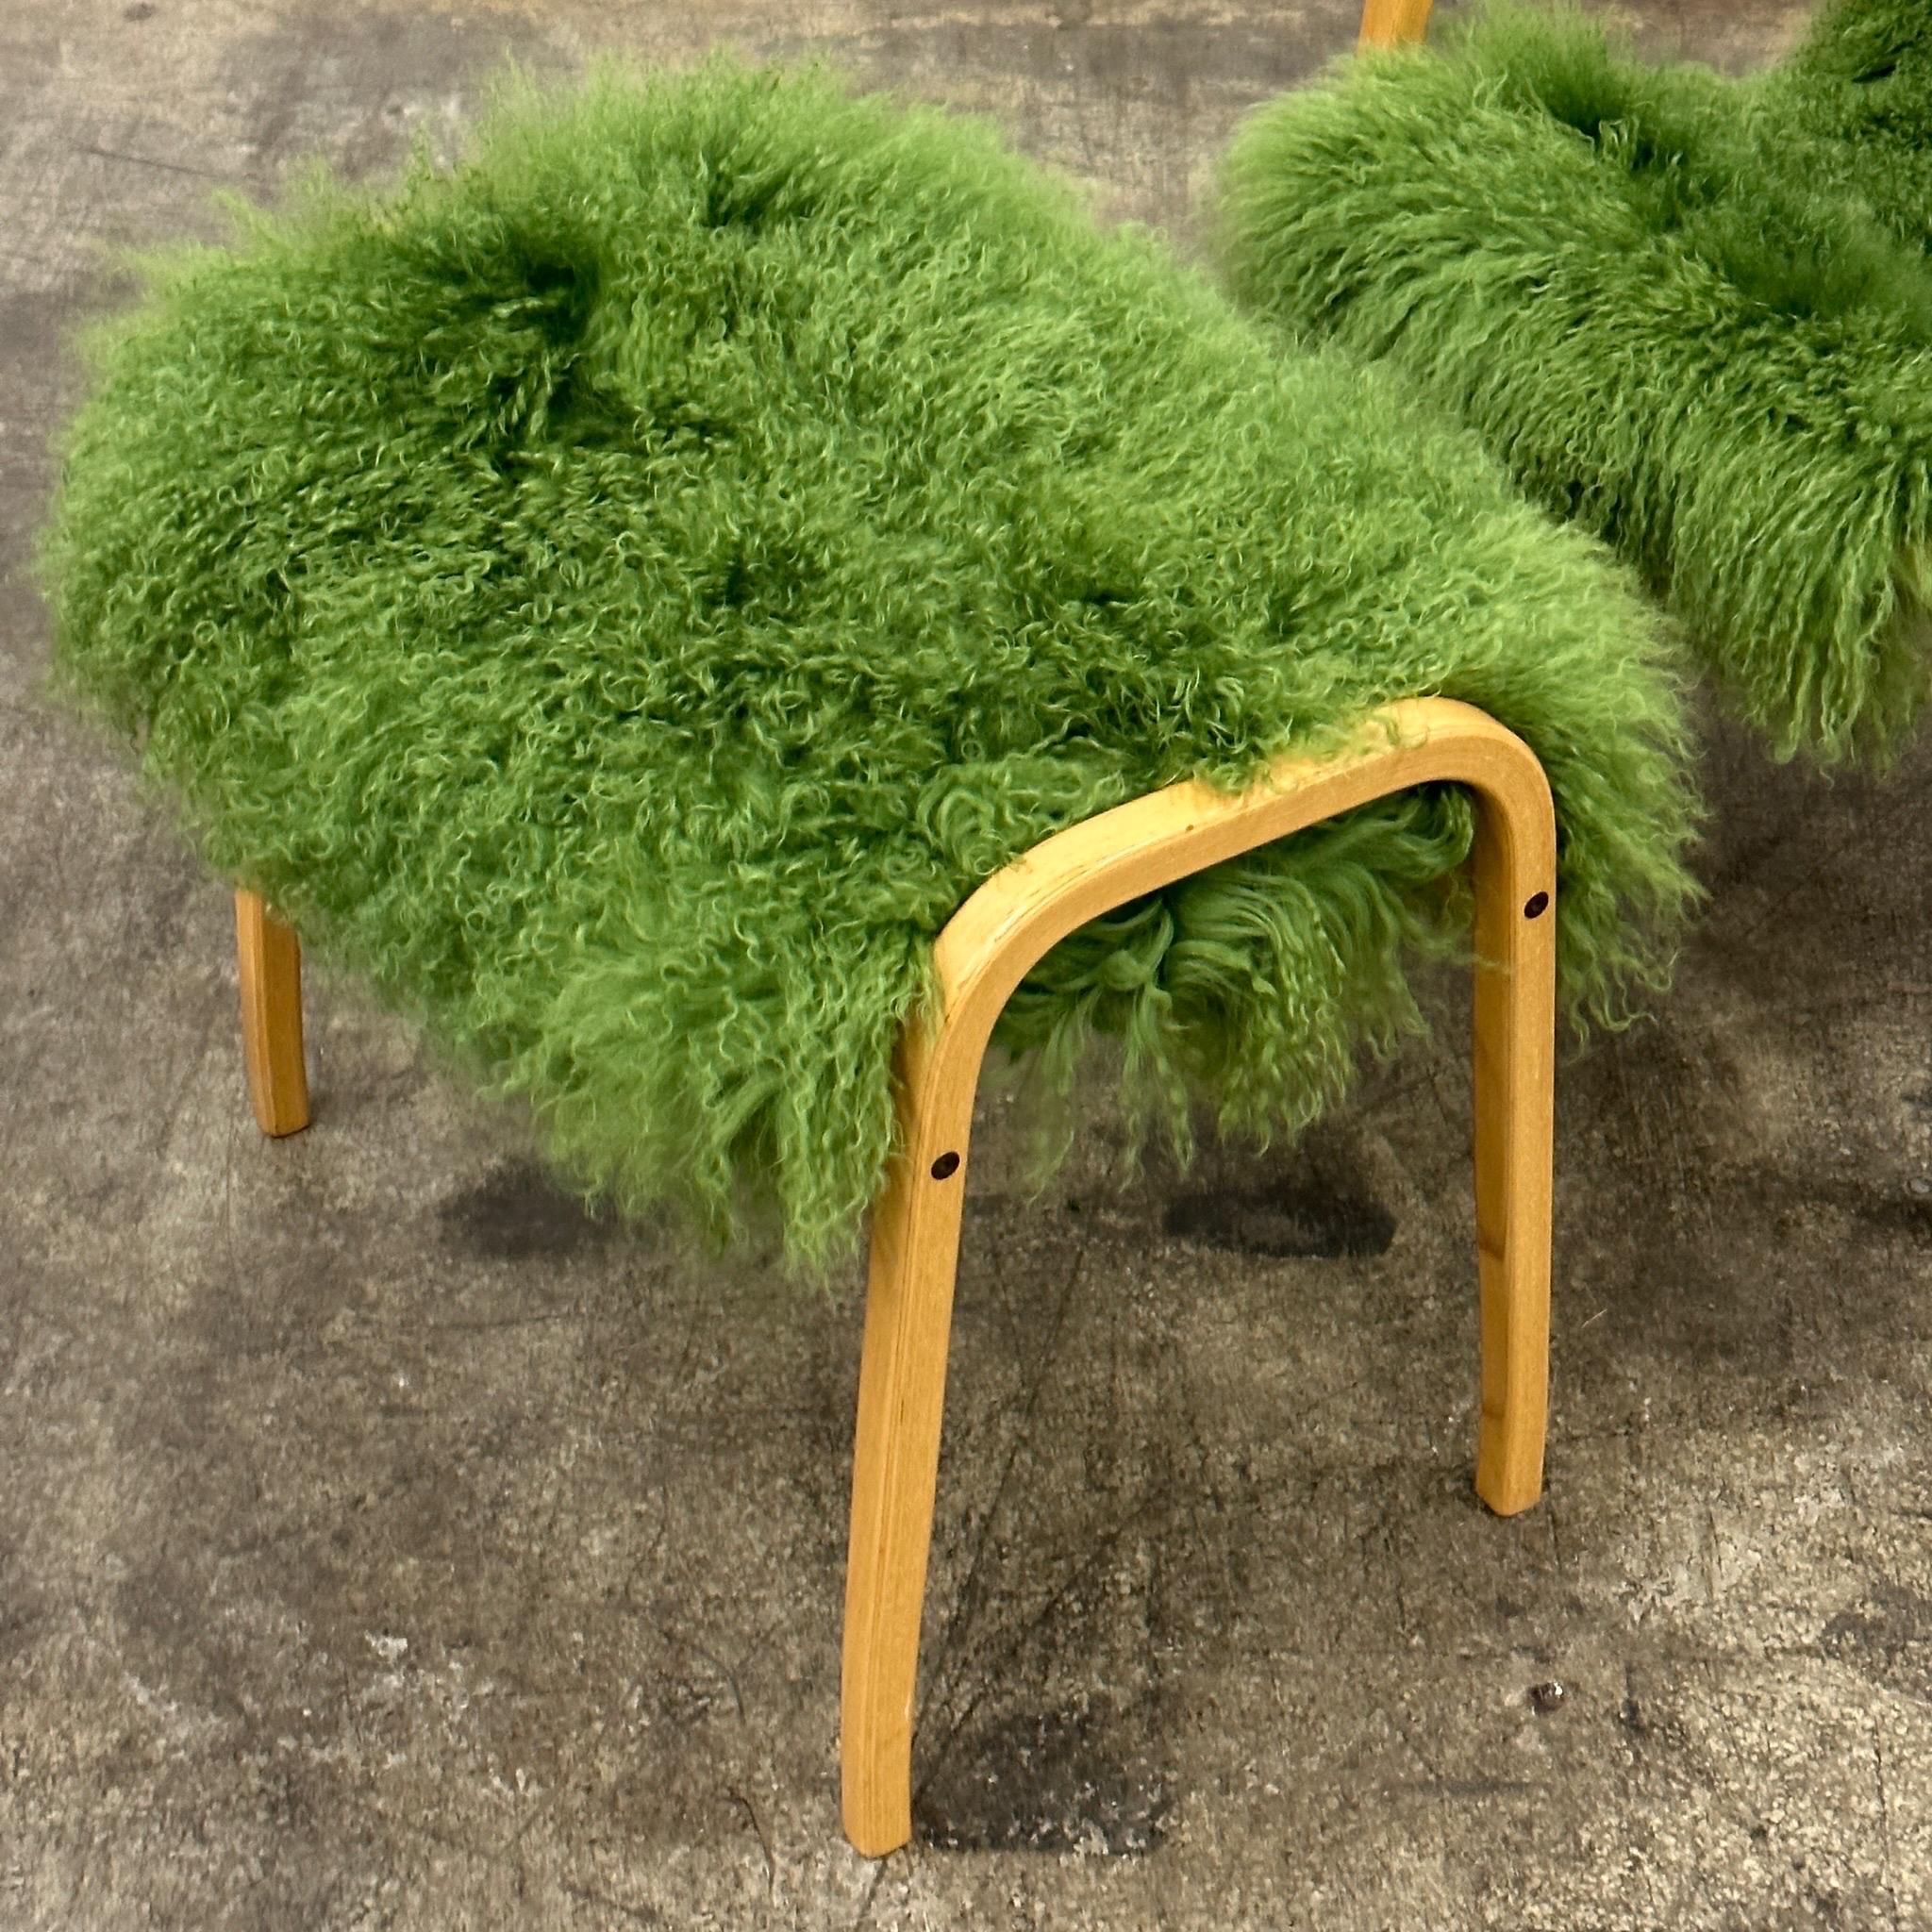 c. 1970s. Made in Sweden. Reupholstered in green dyed Mongolian curly lamb fur. Full beech wood frame. 